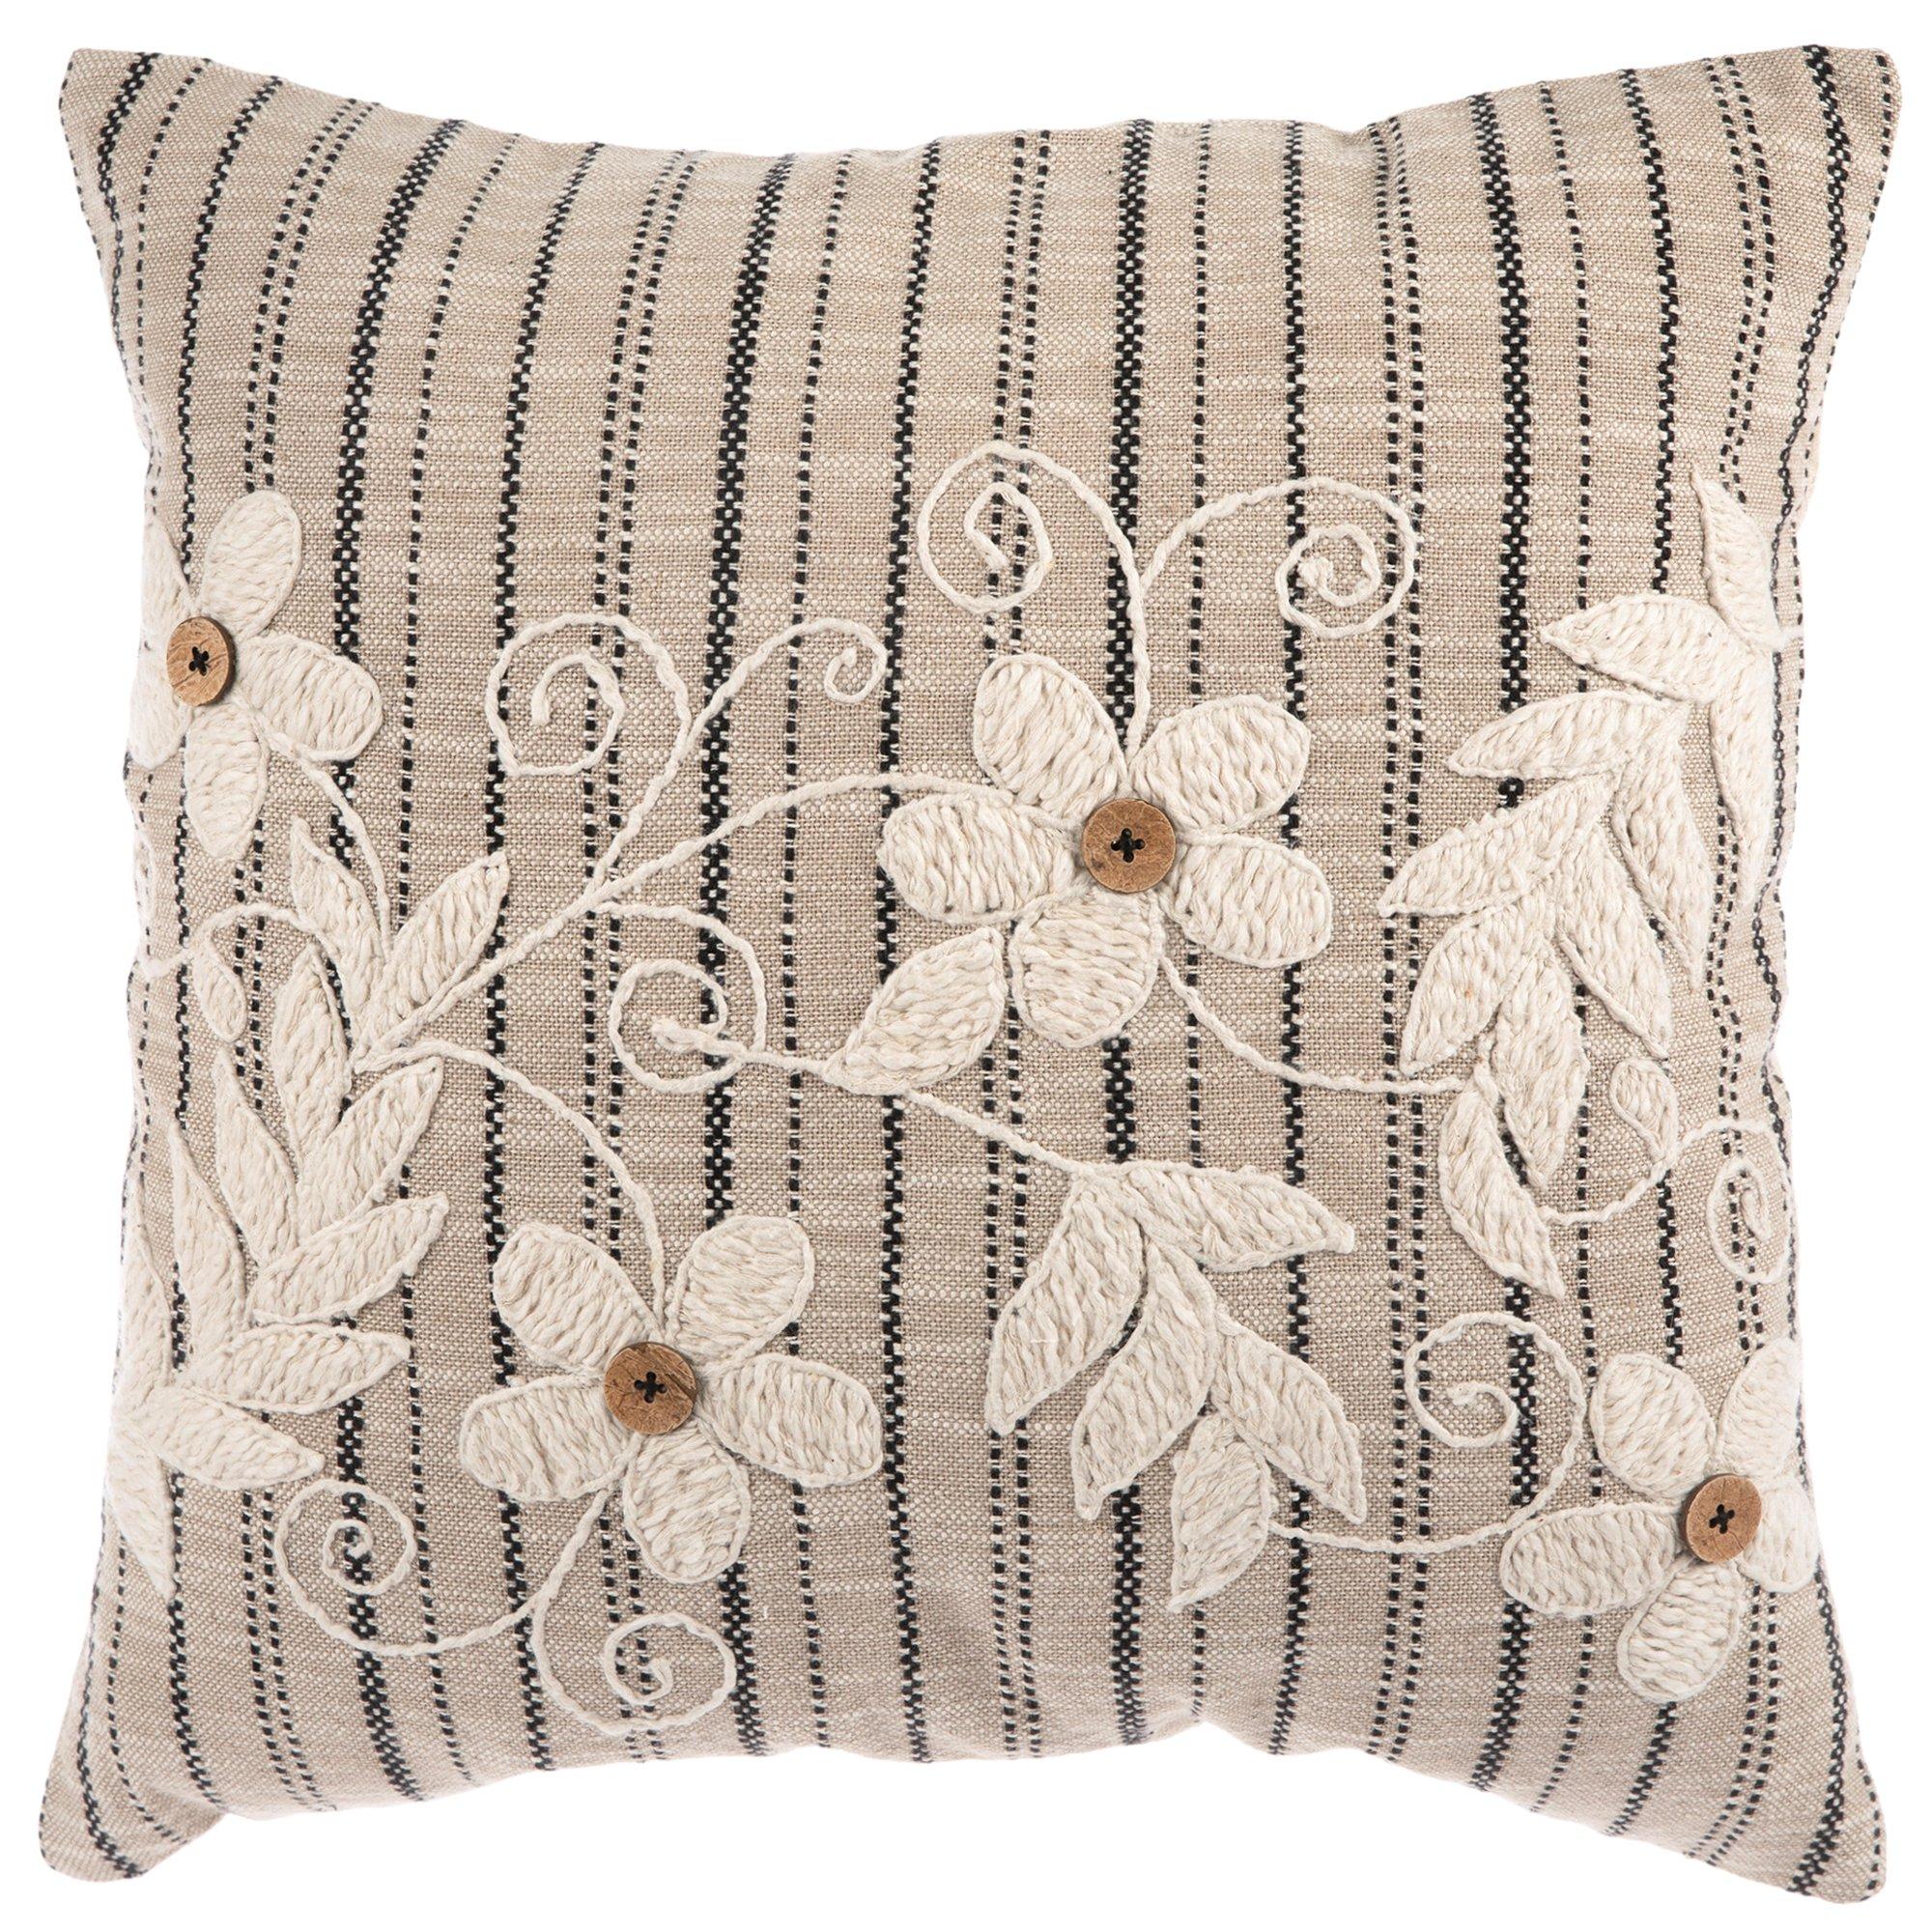 Beige Floral Embroidered Pillow Cover, Hobby Lobby